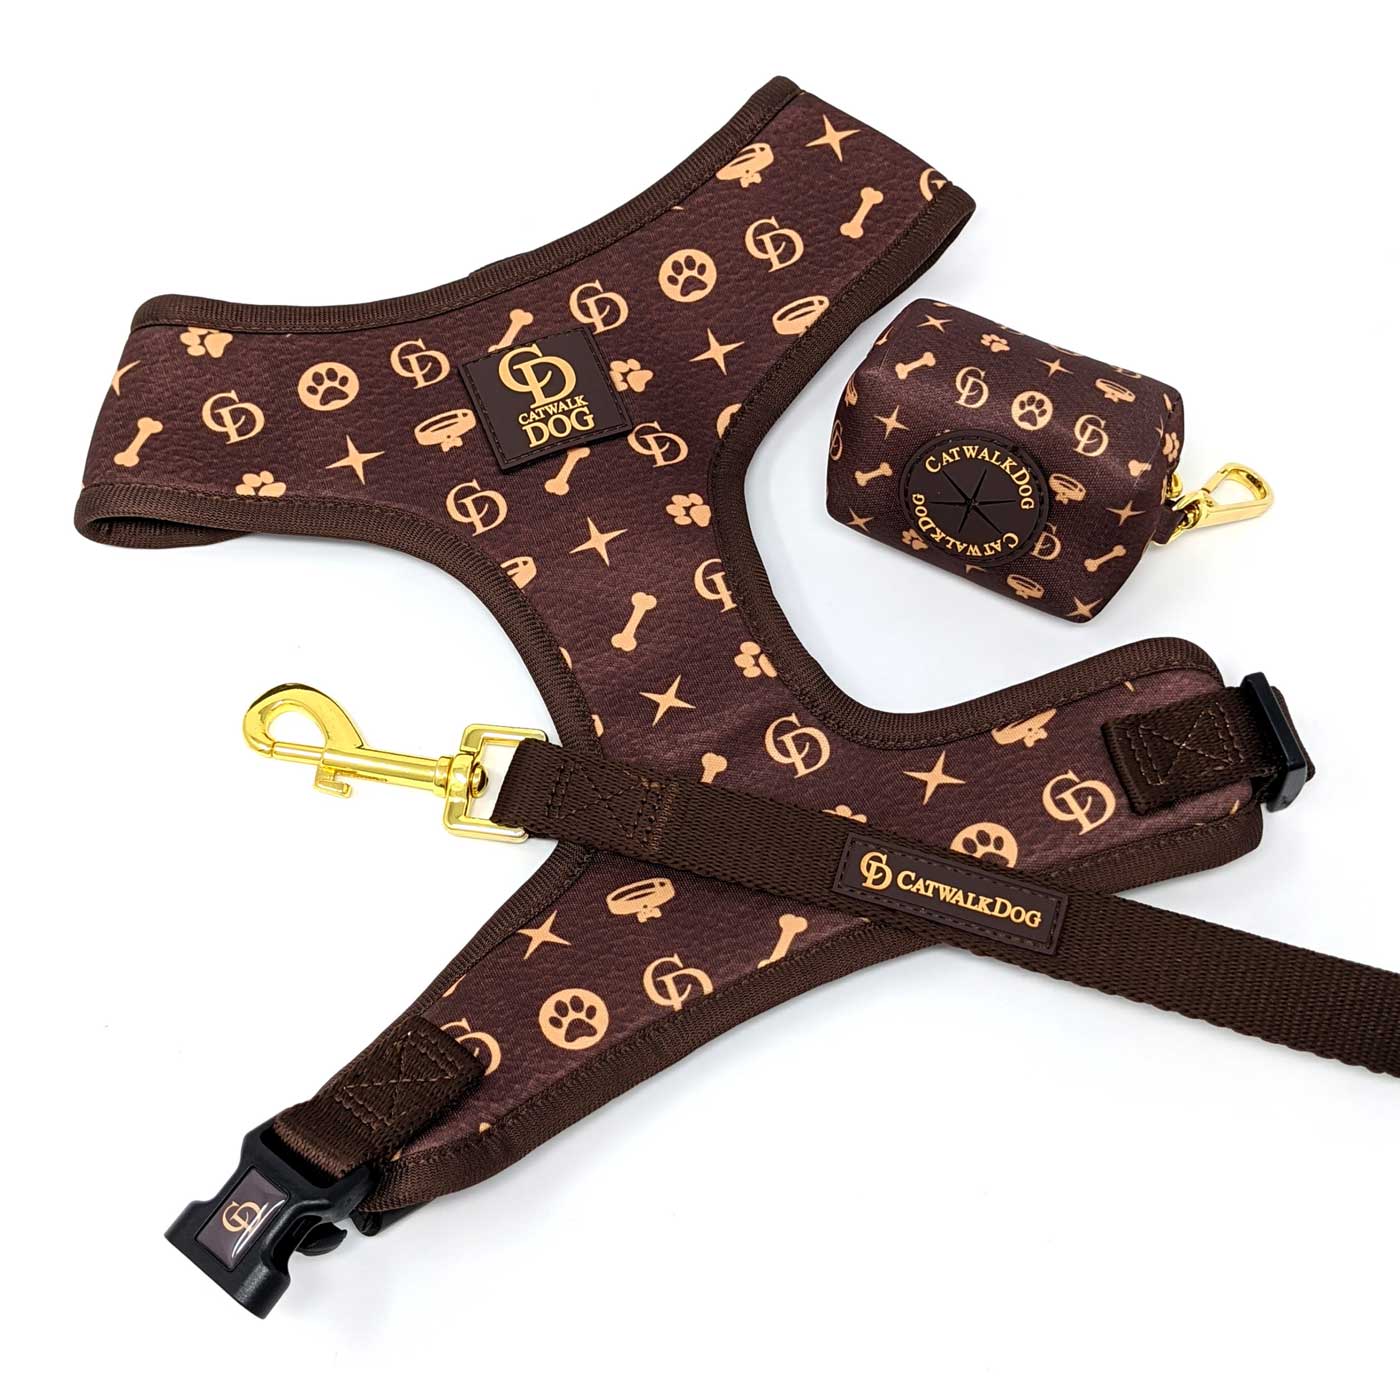 Catwalk Dog Chewy Vuitton Harness  Dog harness, Dog clothes, Dog supplies